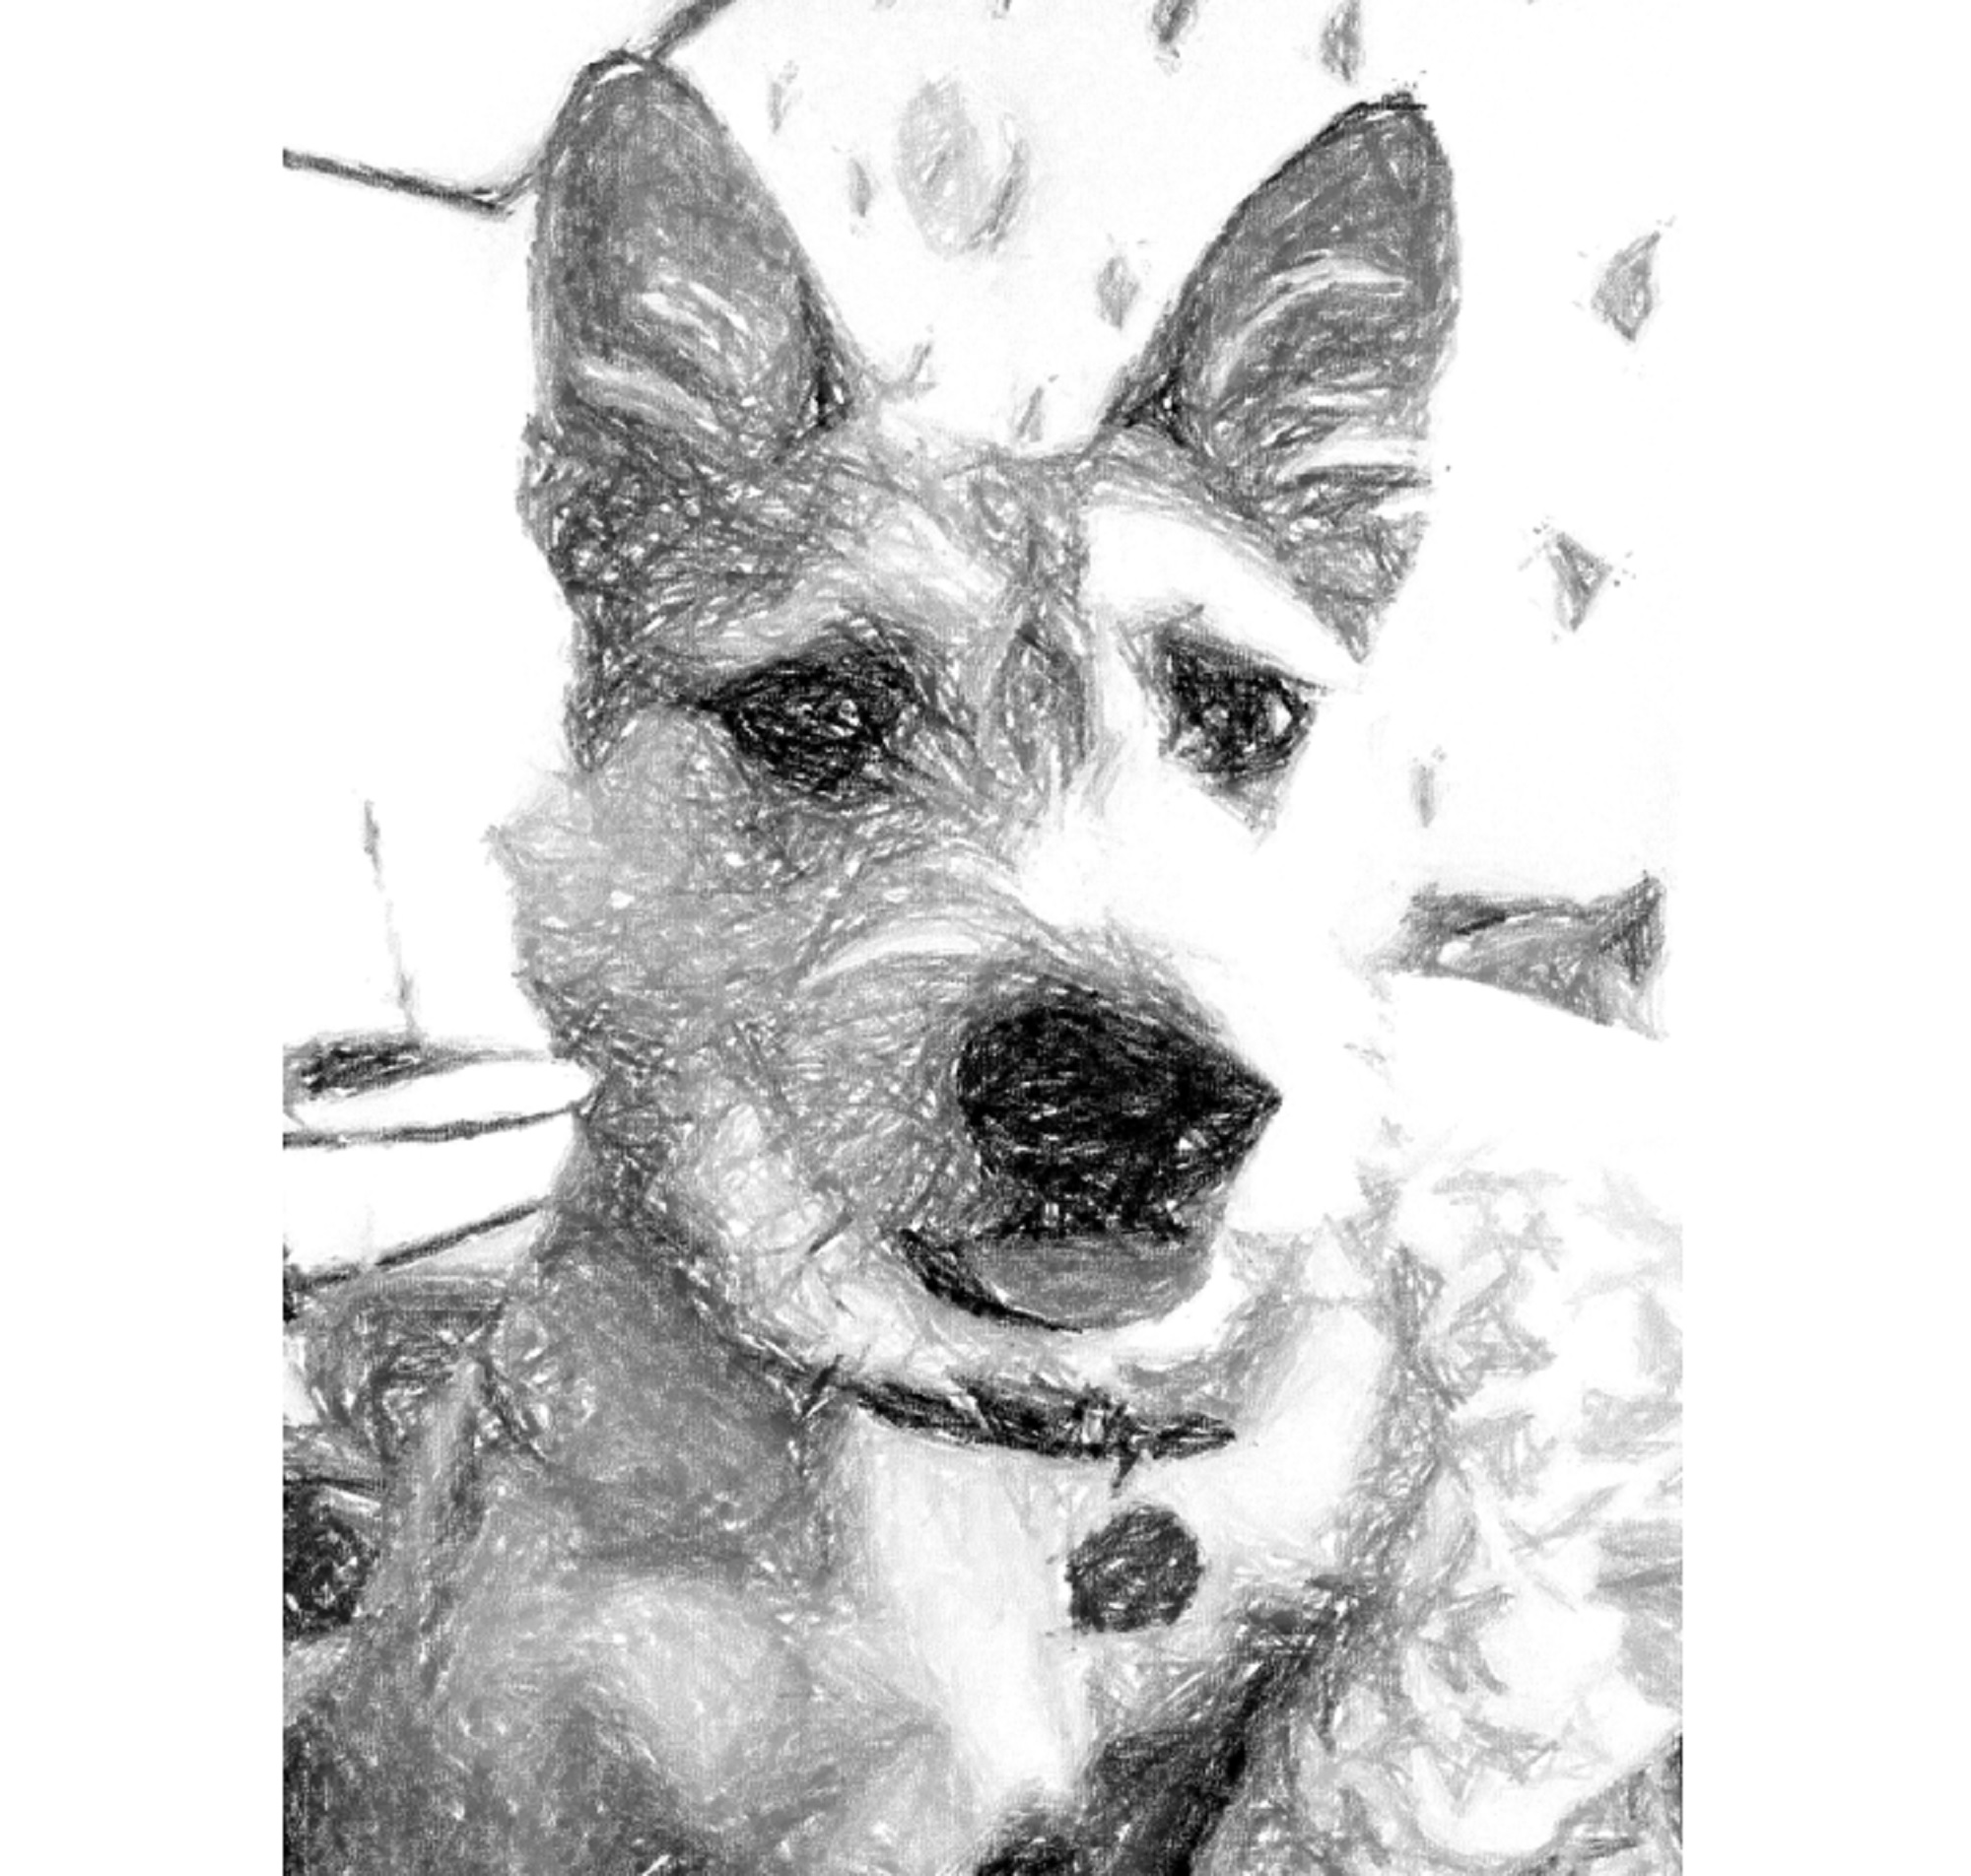 I took the picture of Roscoe and created a pencil rendition.